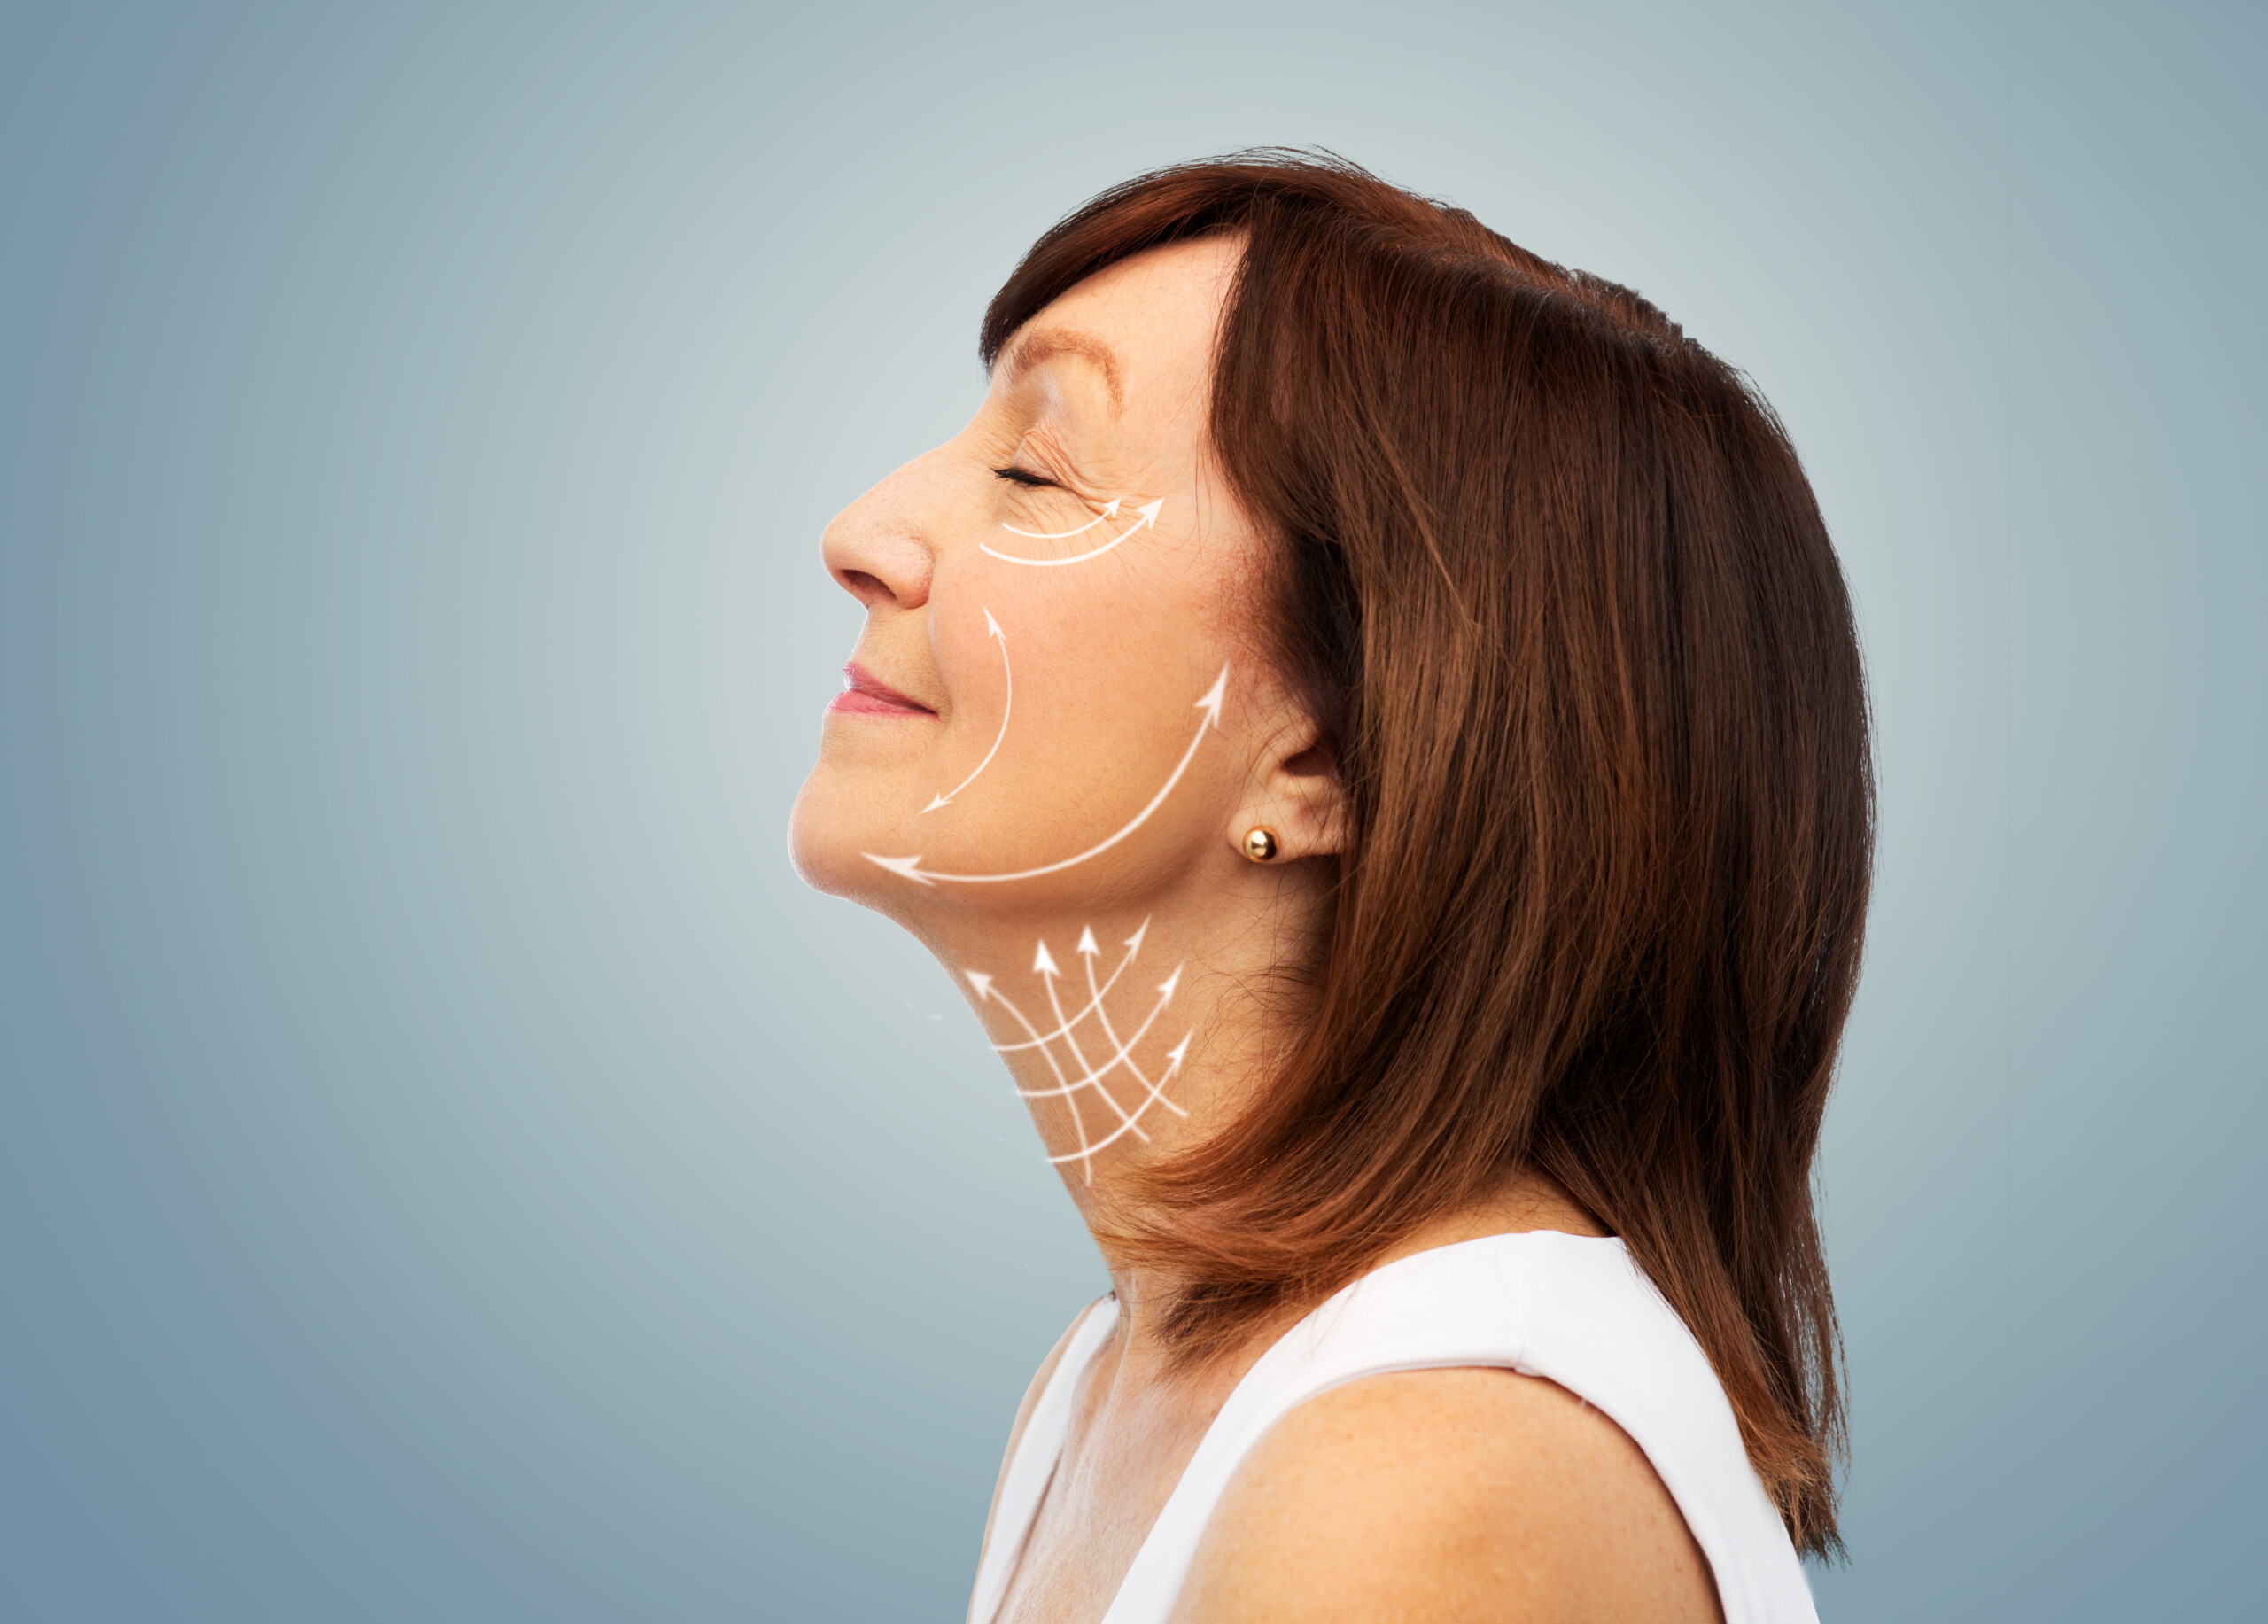 A visual representation of the affects of facelift from a Guide to Facelift surgery